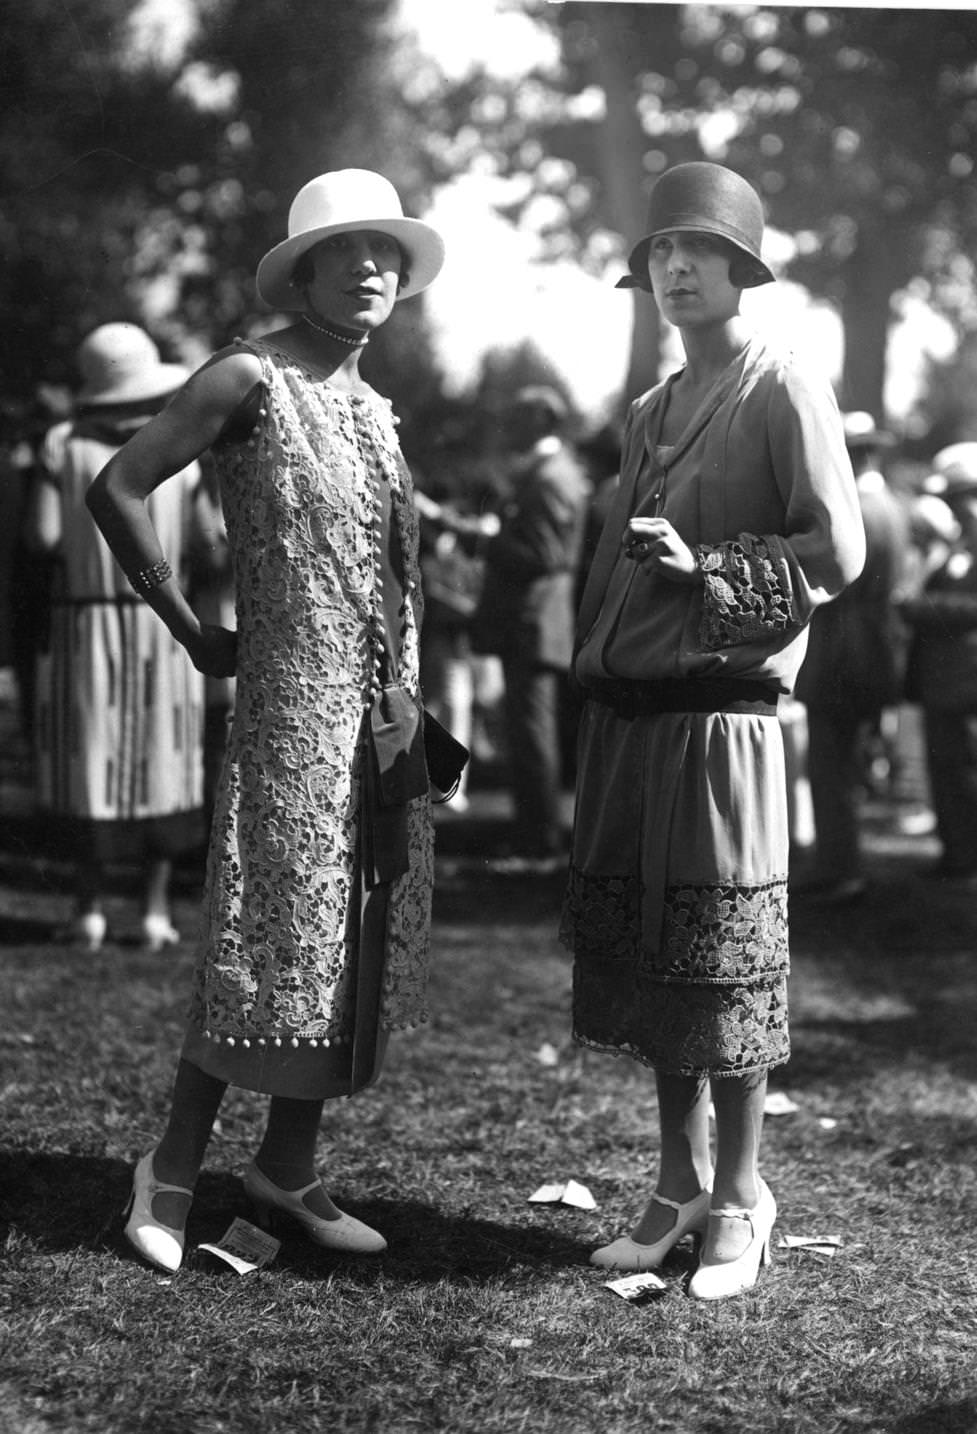 A long sleeveless overdress of lace and a drop-waisted long sleeved tunic dress with lace inserts worn with a cloche hat, 1924